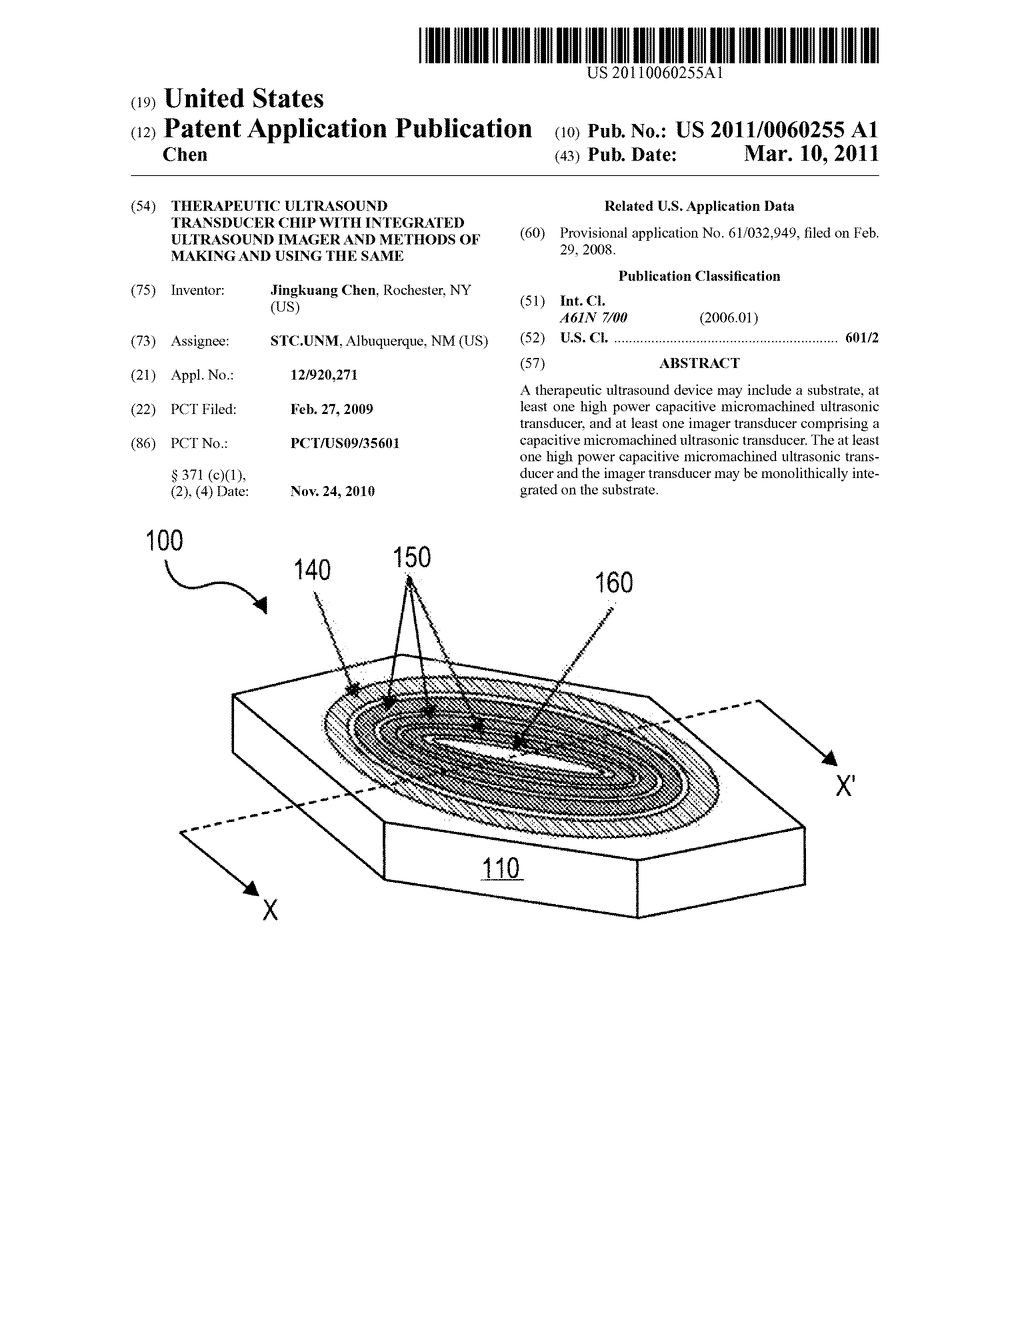 THERAPEUTIC ULTRASOUND TRANSDUCER CHIP WITH INTEGRATED ULTRASOUND IMAGER AND METHODS OF MAKING AND USING THE SAME - diagram, schematic, and image 01